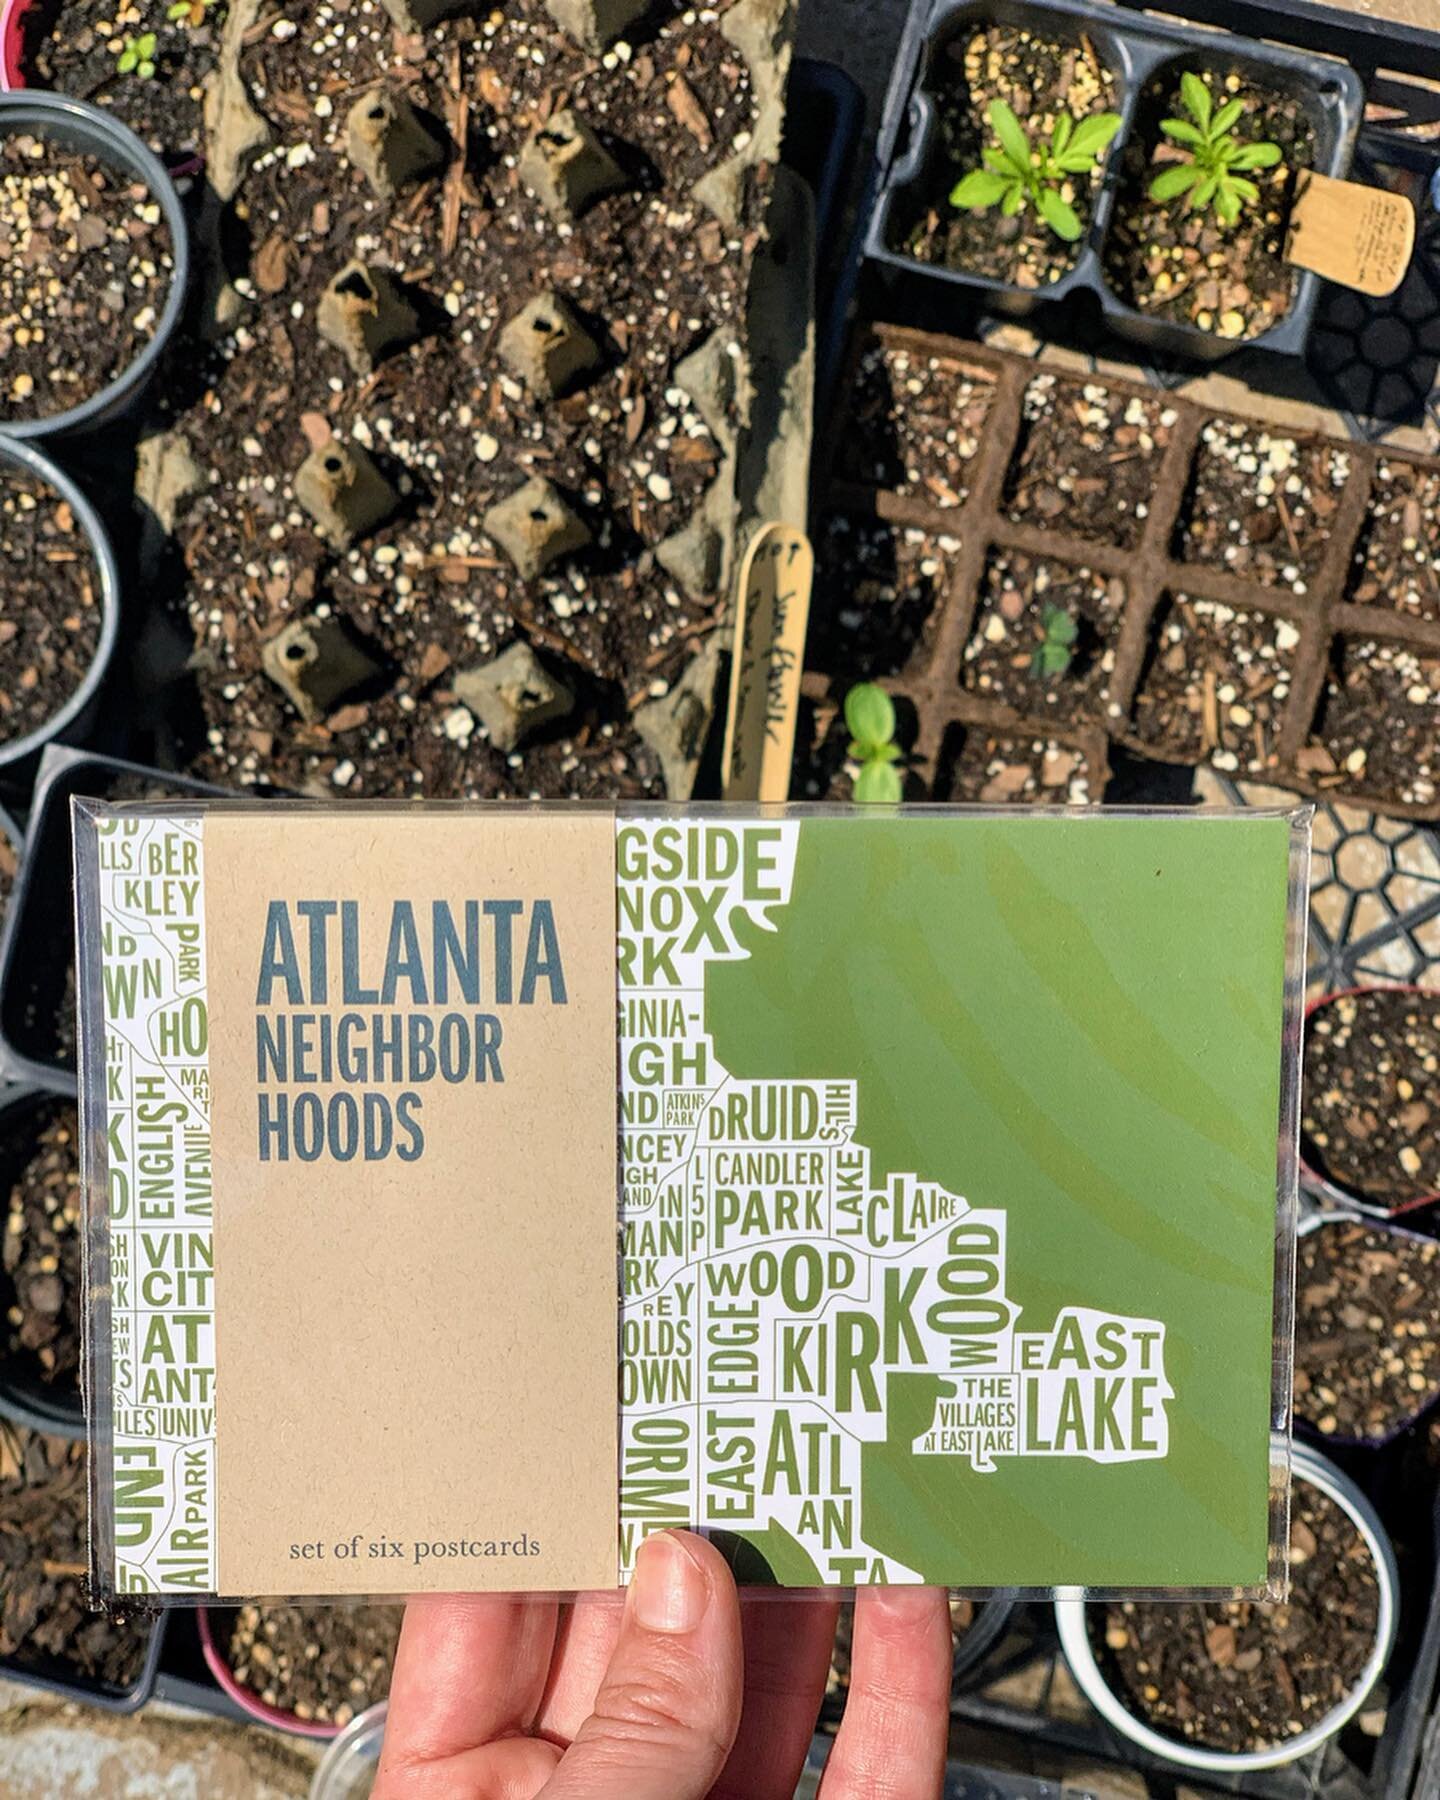 🌱 more free seedlings are on the way! In the meantime, you can still stop by the Victory Garden stand and purchase some art through my contactless honor system 💚
.
.
.
💌📬 if it&rsquo;s been hard to keep in touch with loved ones and neighbors, the